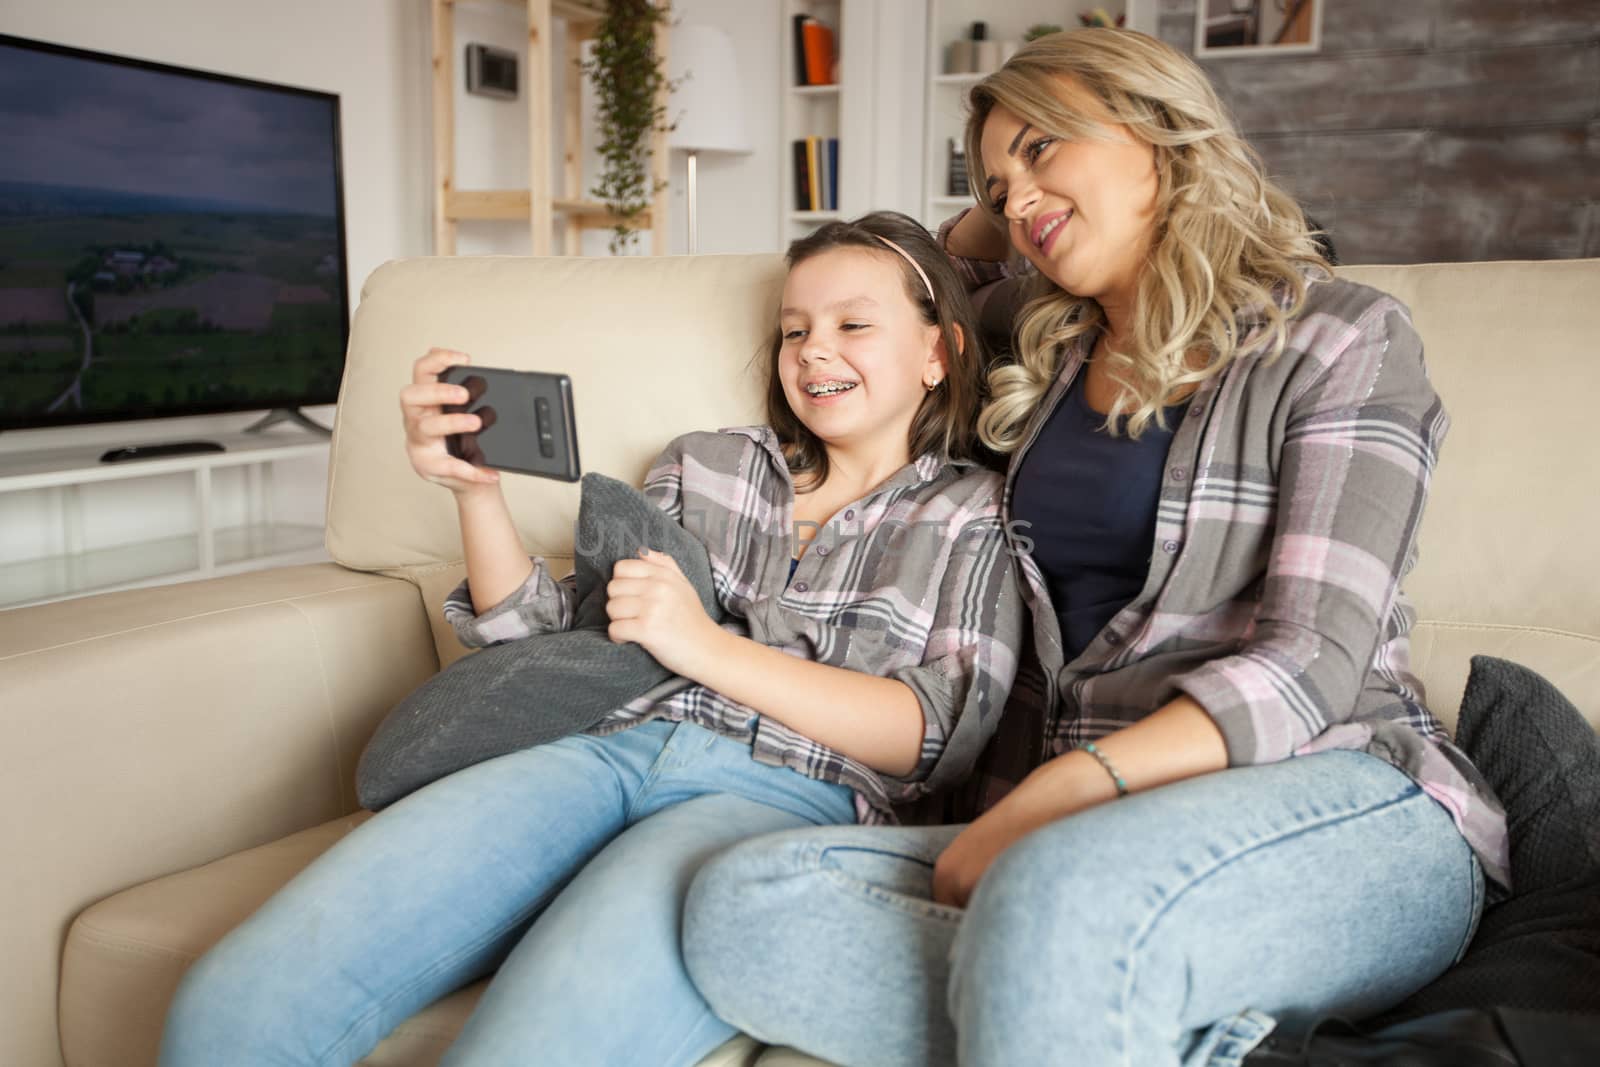 Mother and daughter with matching clothes sitting on the couch watching a funny video on smartphone.